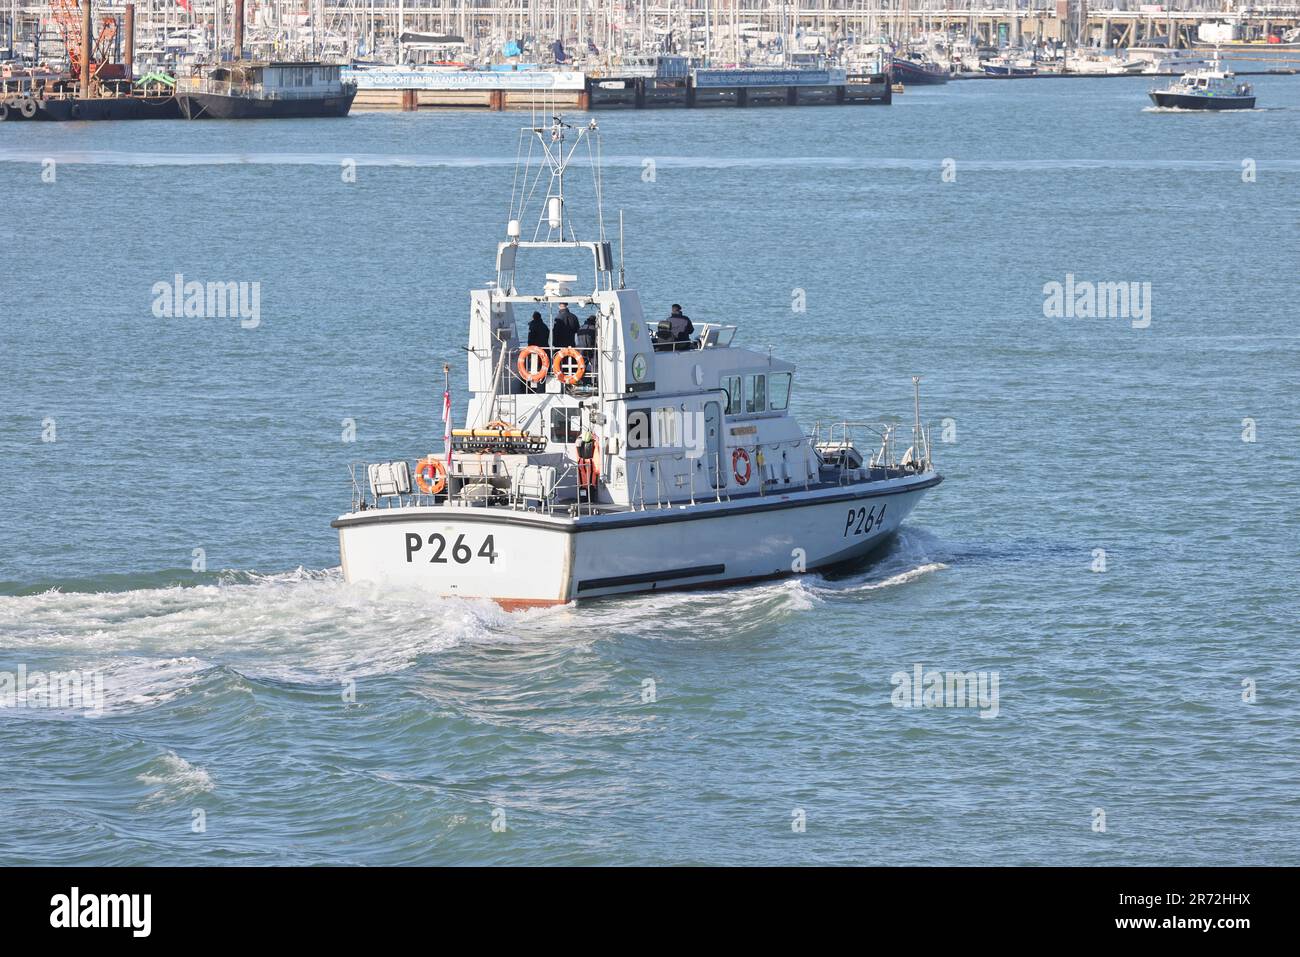 The Royal Navy Fast Training Boat HMS ARCHER (P264) arrives at the Naval Base Stock Photo